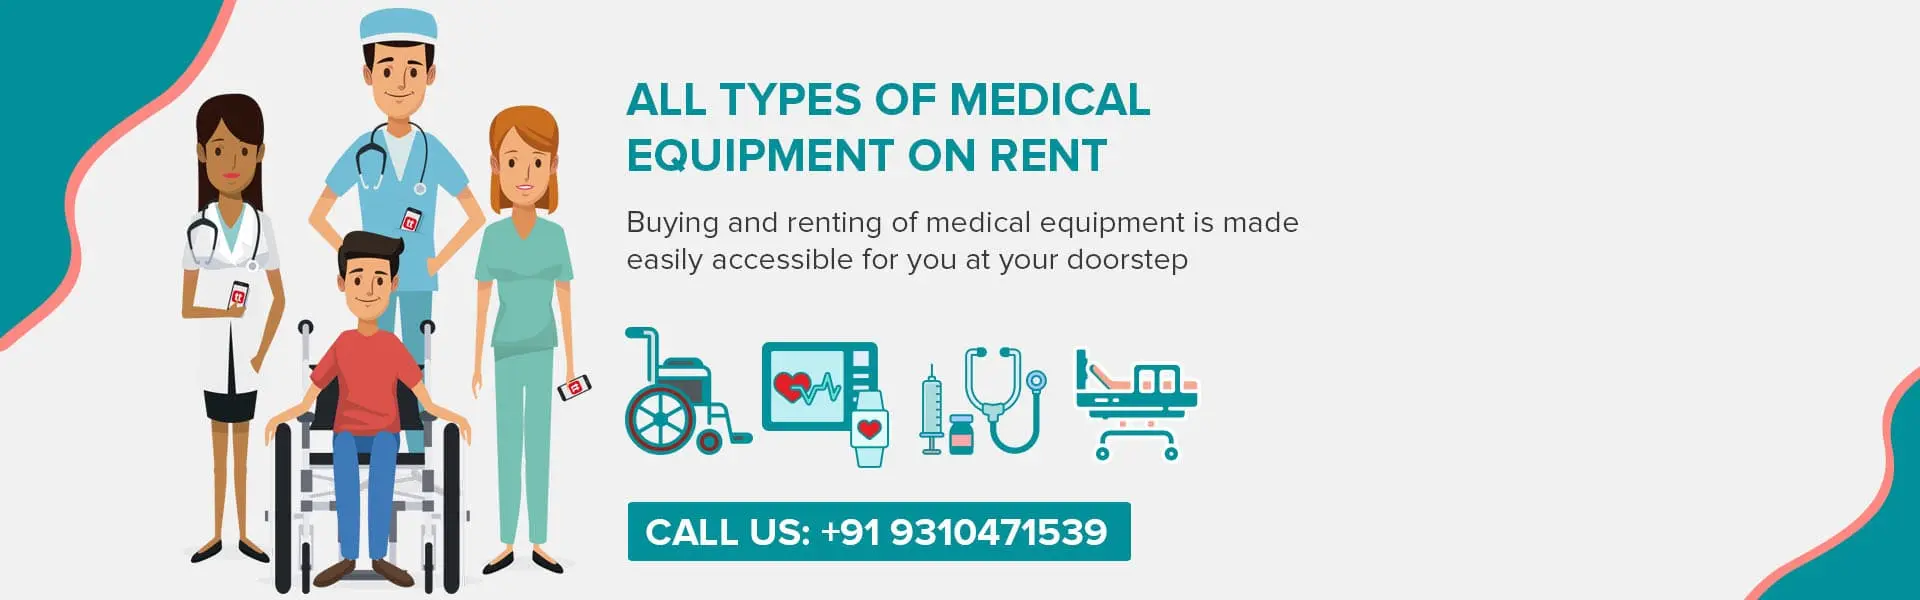 All type of medical equipment services on rent